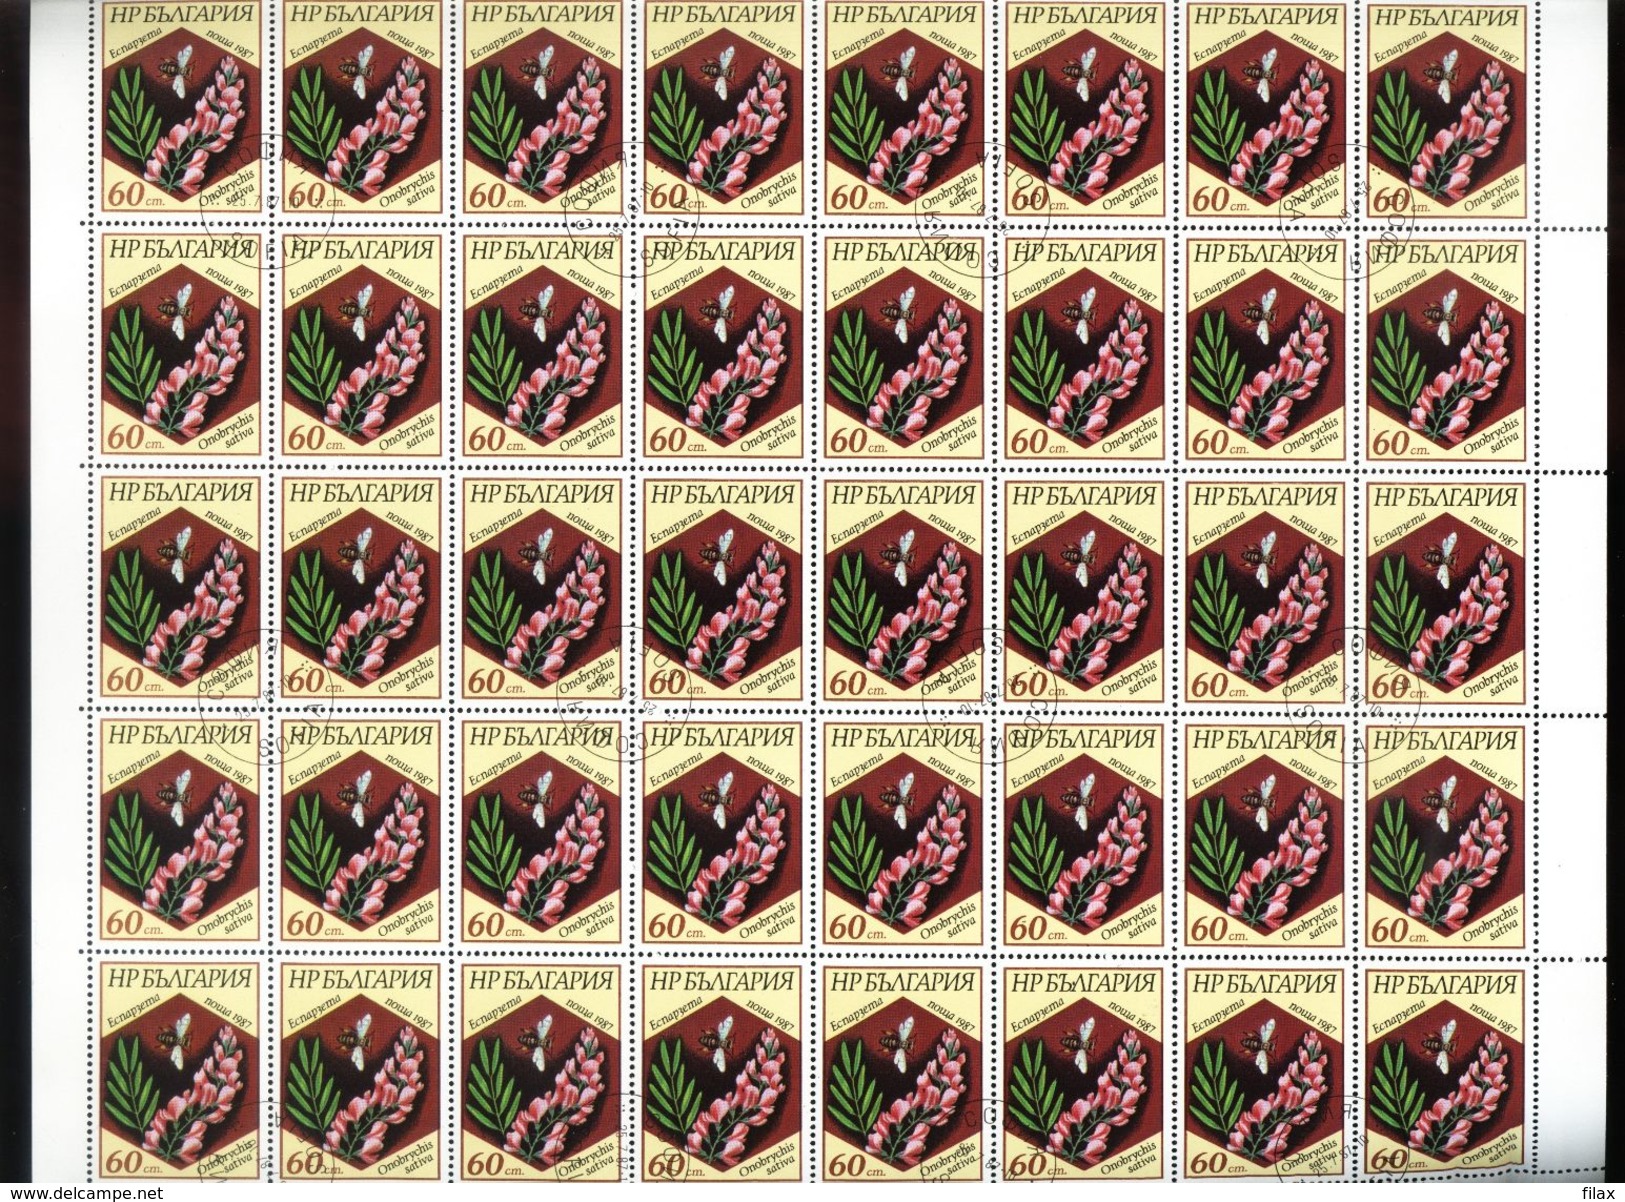 LOT BGCTO02 - CHEAP CTO STAMPS IN SHEETS (for packets or resale)